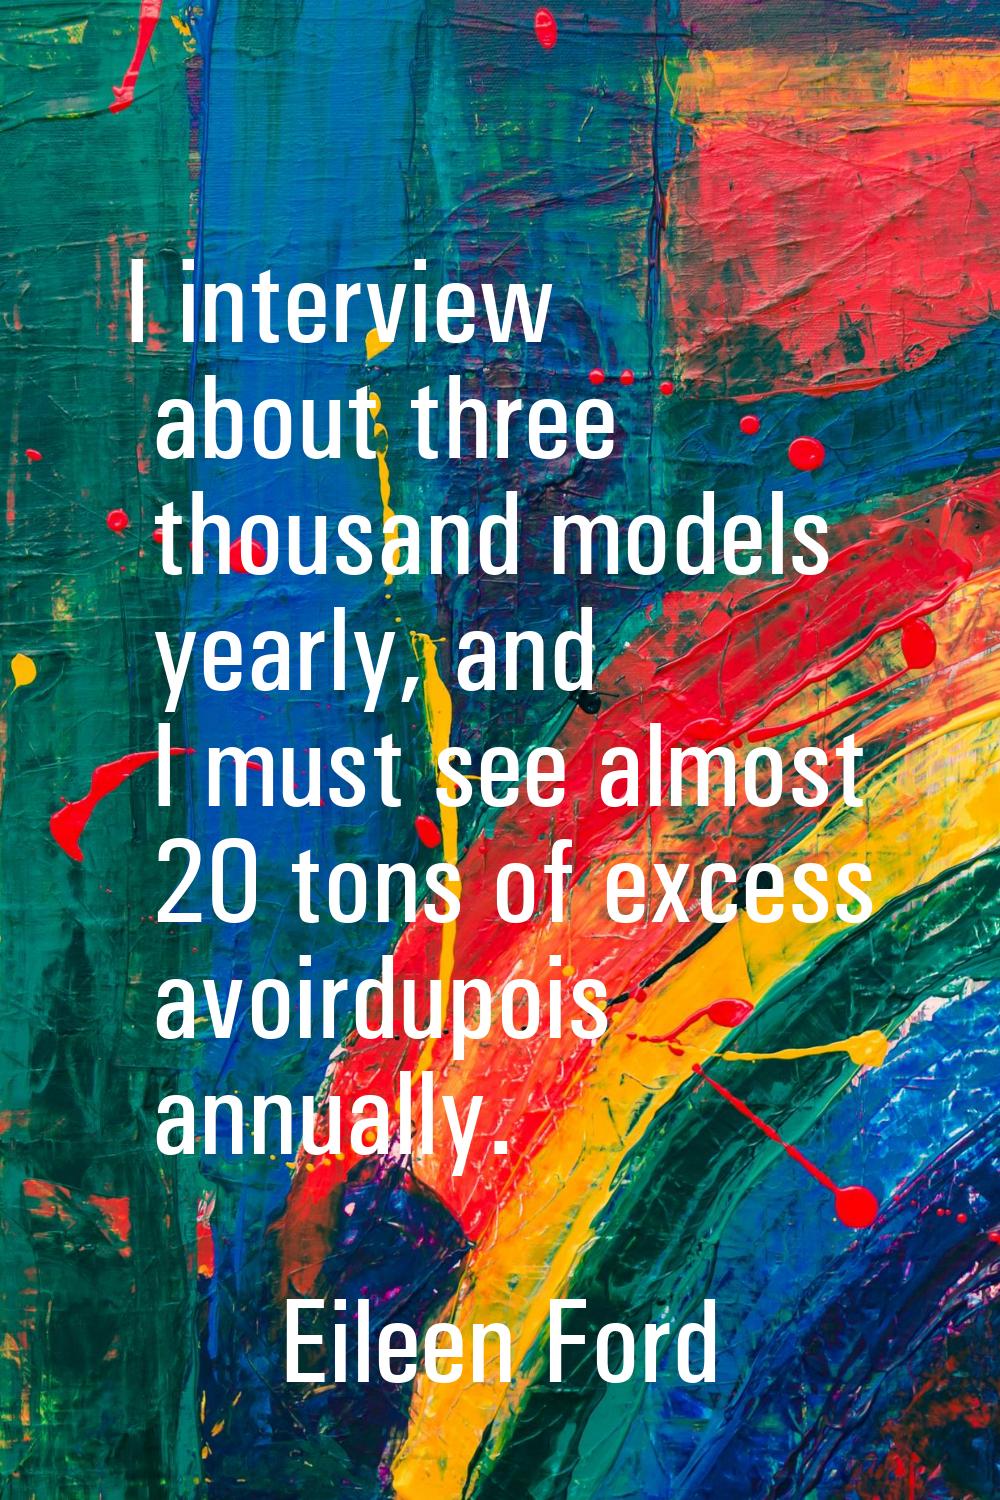 I interview about three thousand models yearly, and I must see almost 20 tons of excess avoirdupois